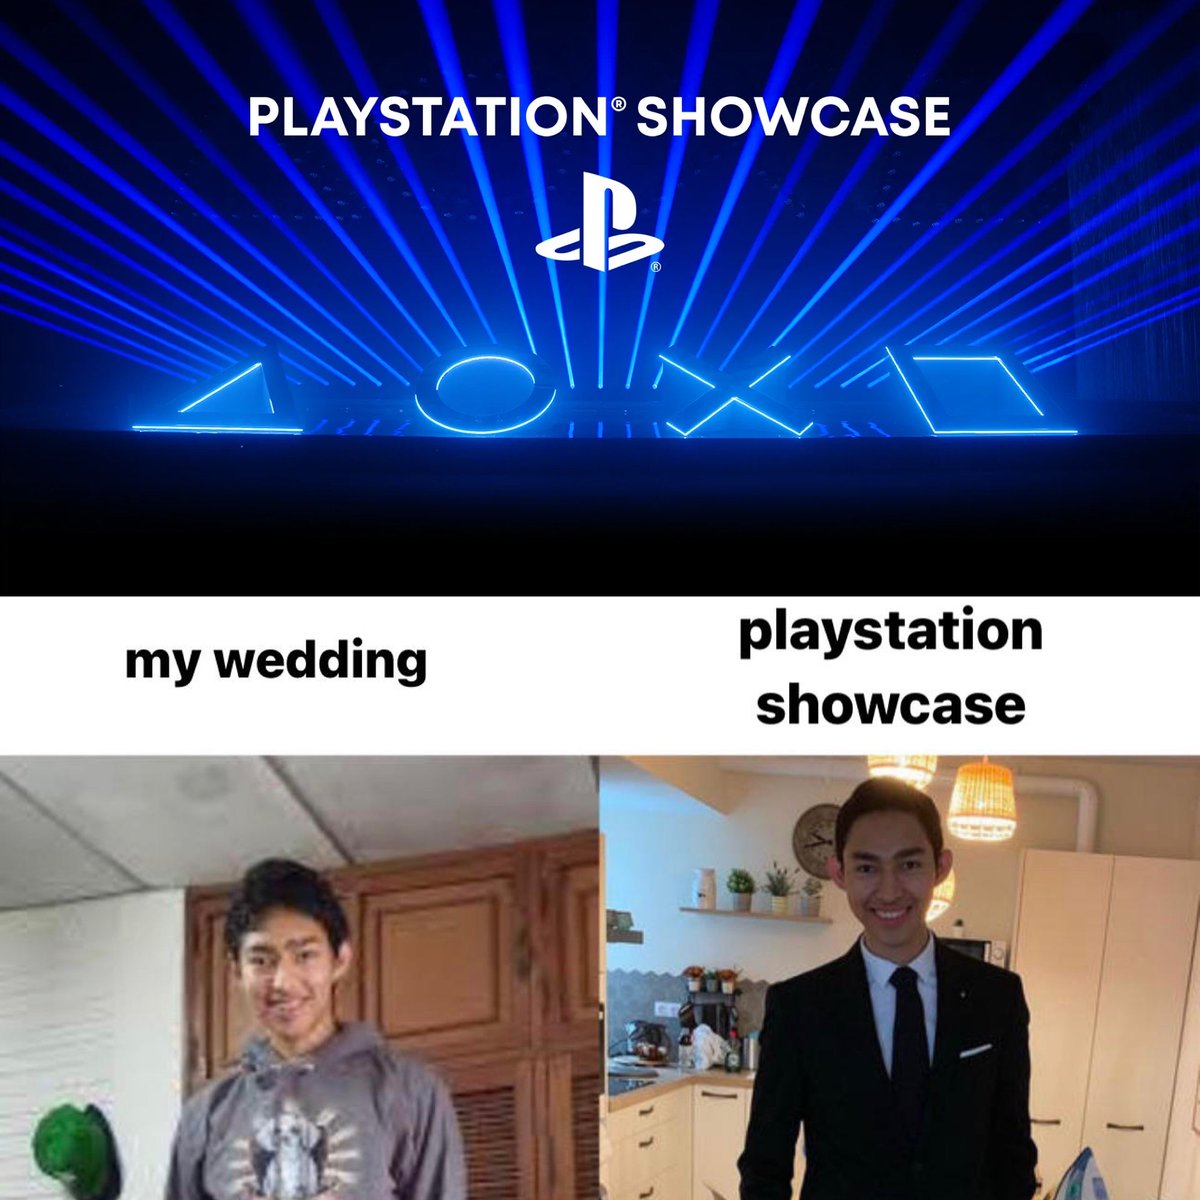 Happy May

PlayStation Showcase Month 🙏